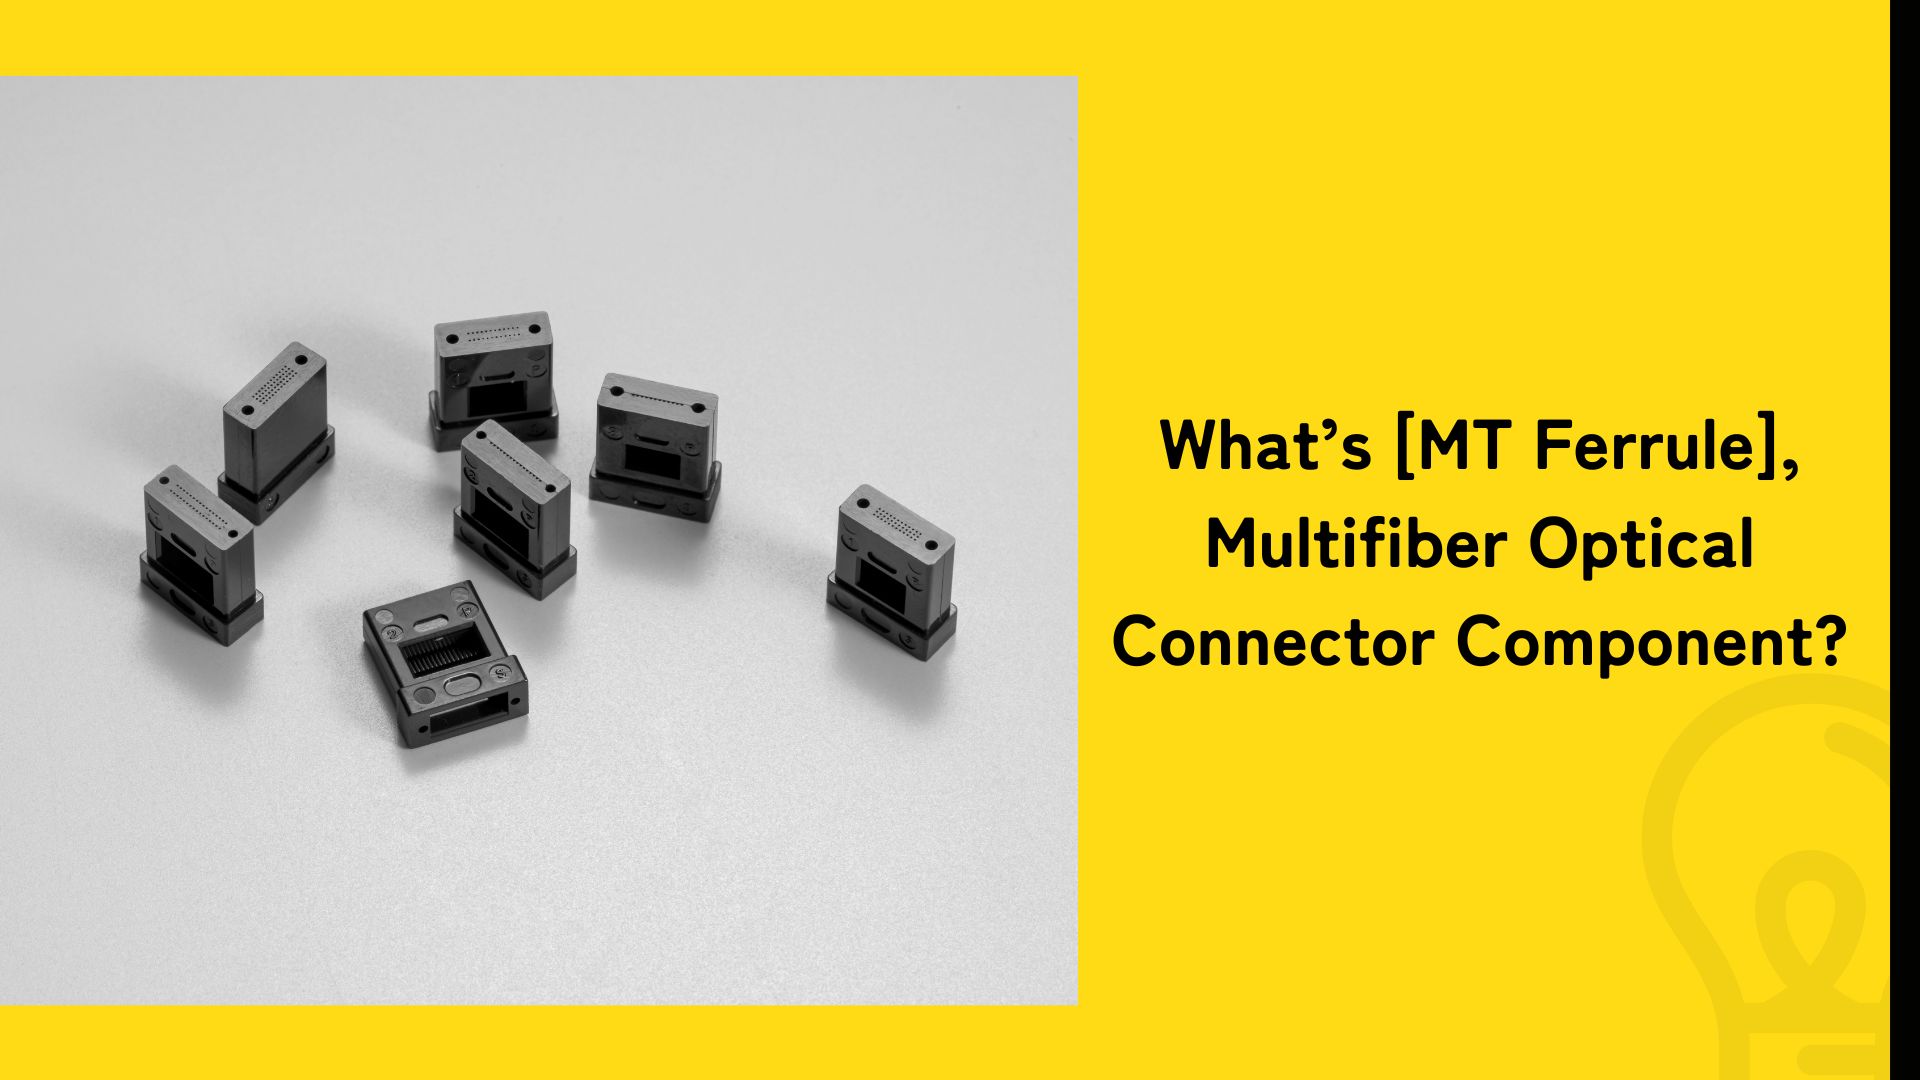 What is multifiber optical connector component [MT Ferrule]?